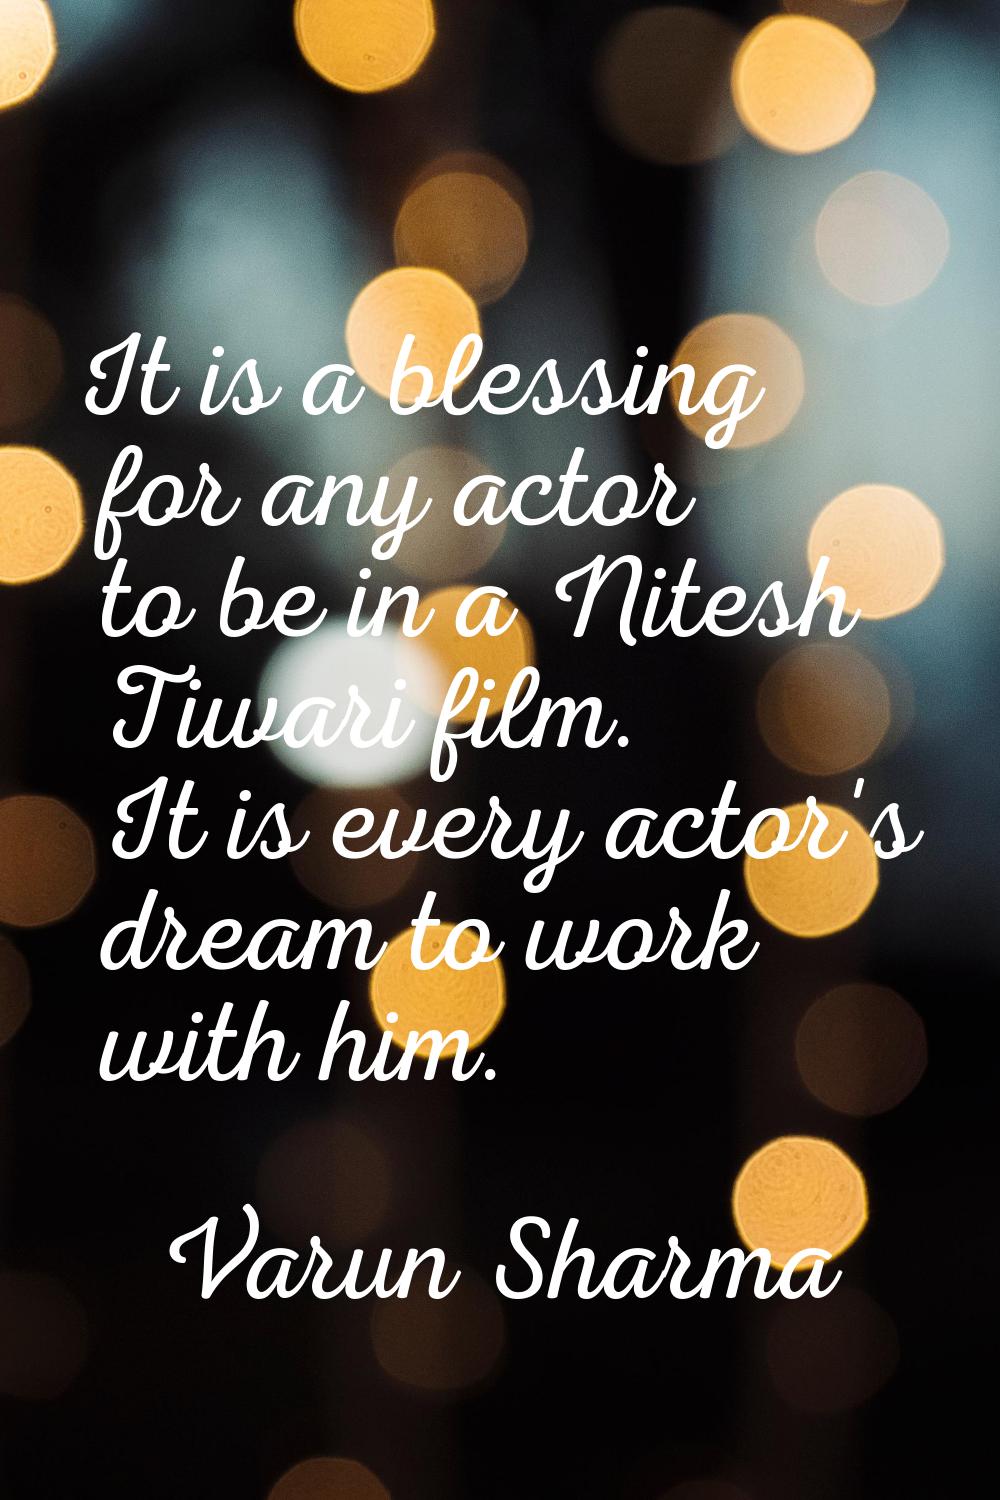 It is a blessing for any actor to be in a Nitesh Tiwari film. It is every actor's dream to work wit